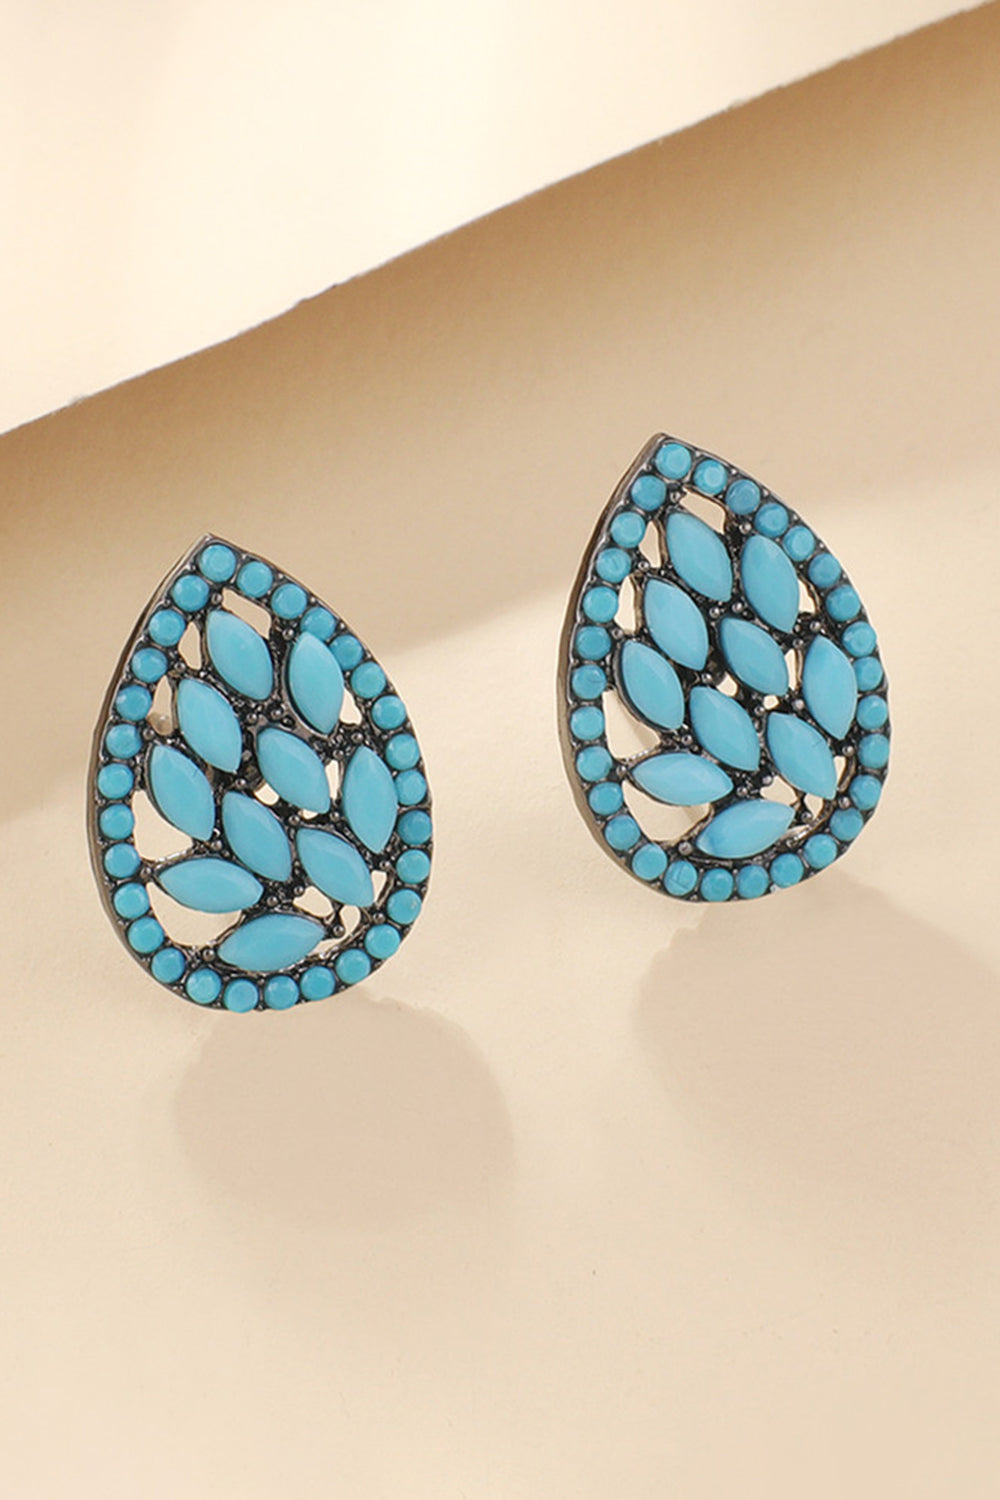 Wheat Turquoise Stud Earrings Sentient Beauty Fashions jewelry